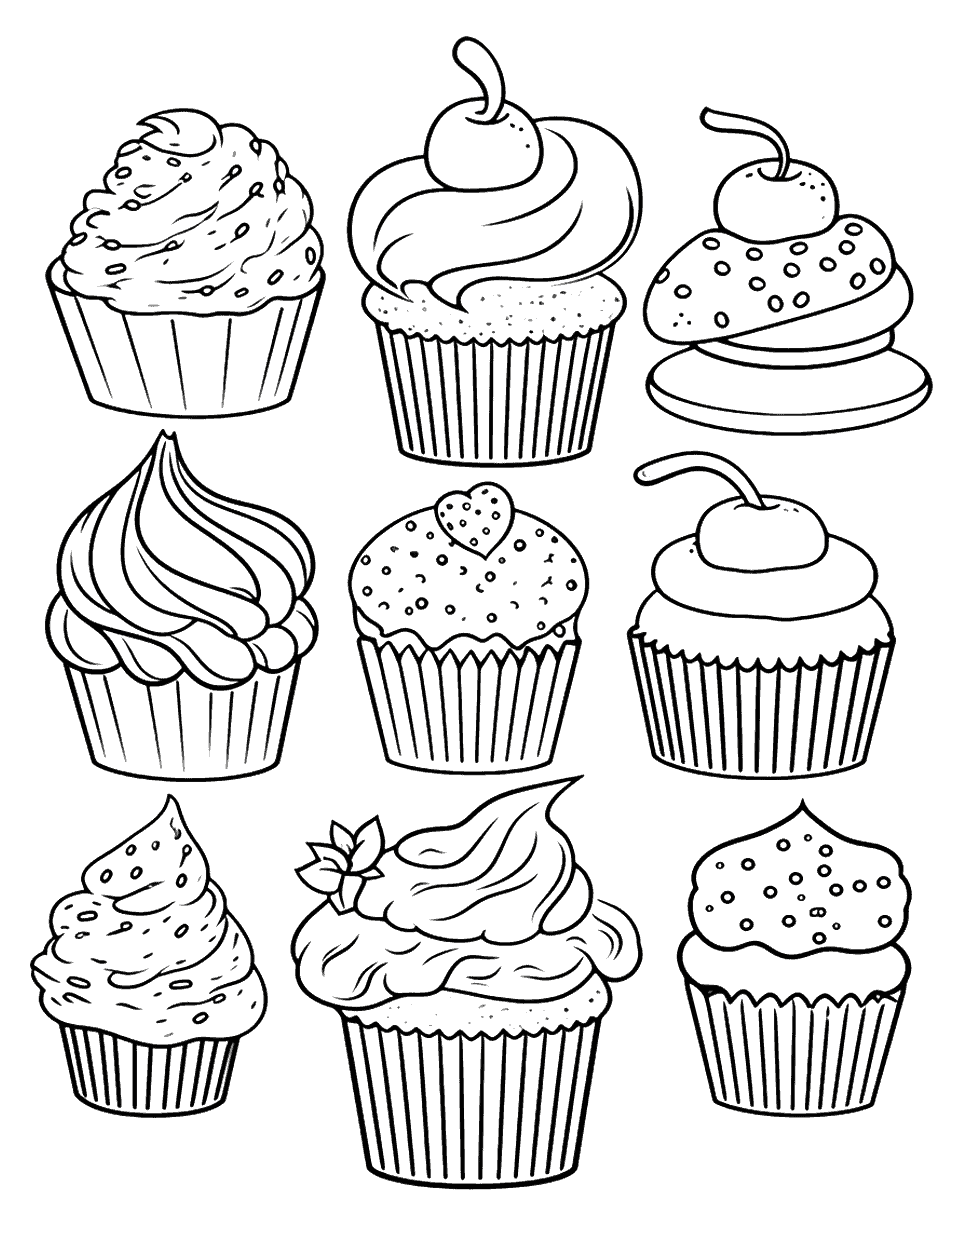 Dessert Galore Cupcake Coloring Page - An assortment of different cupcakes and other desserts spread out.